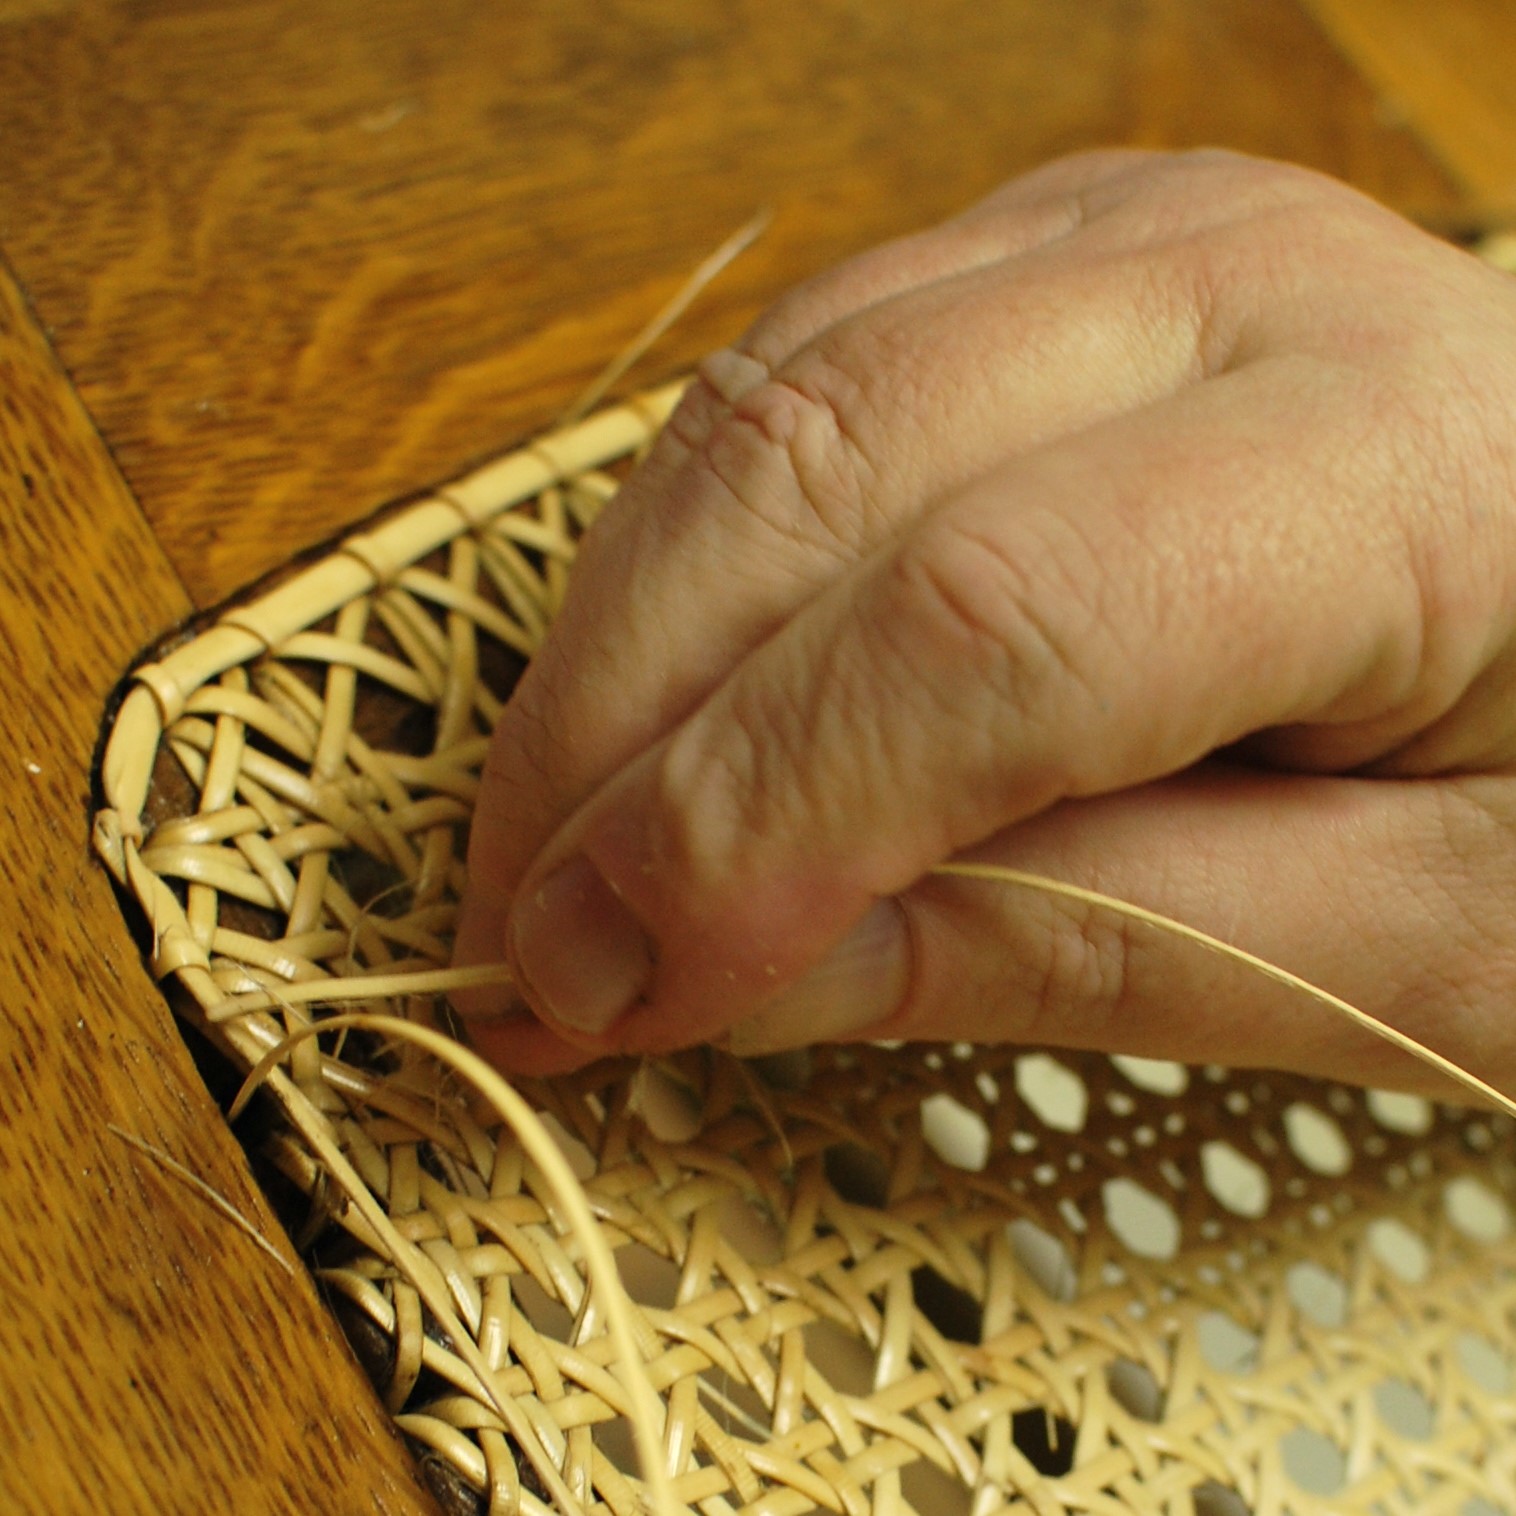 A close-up image of a hand caning a chair.